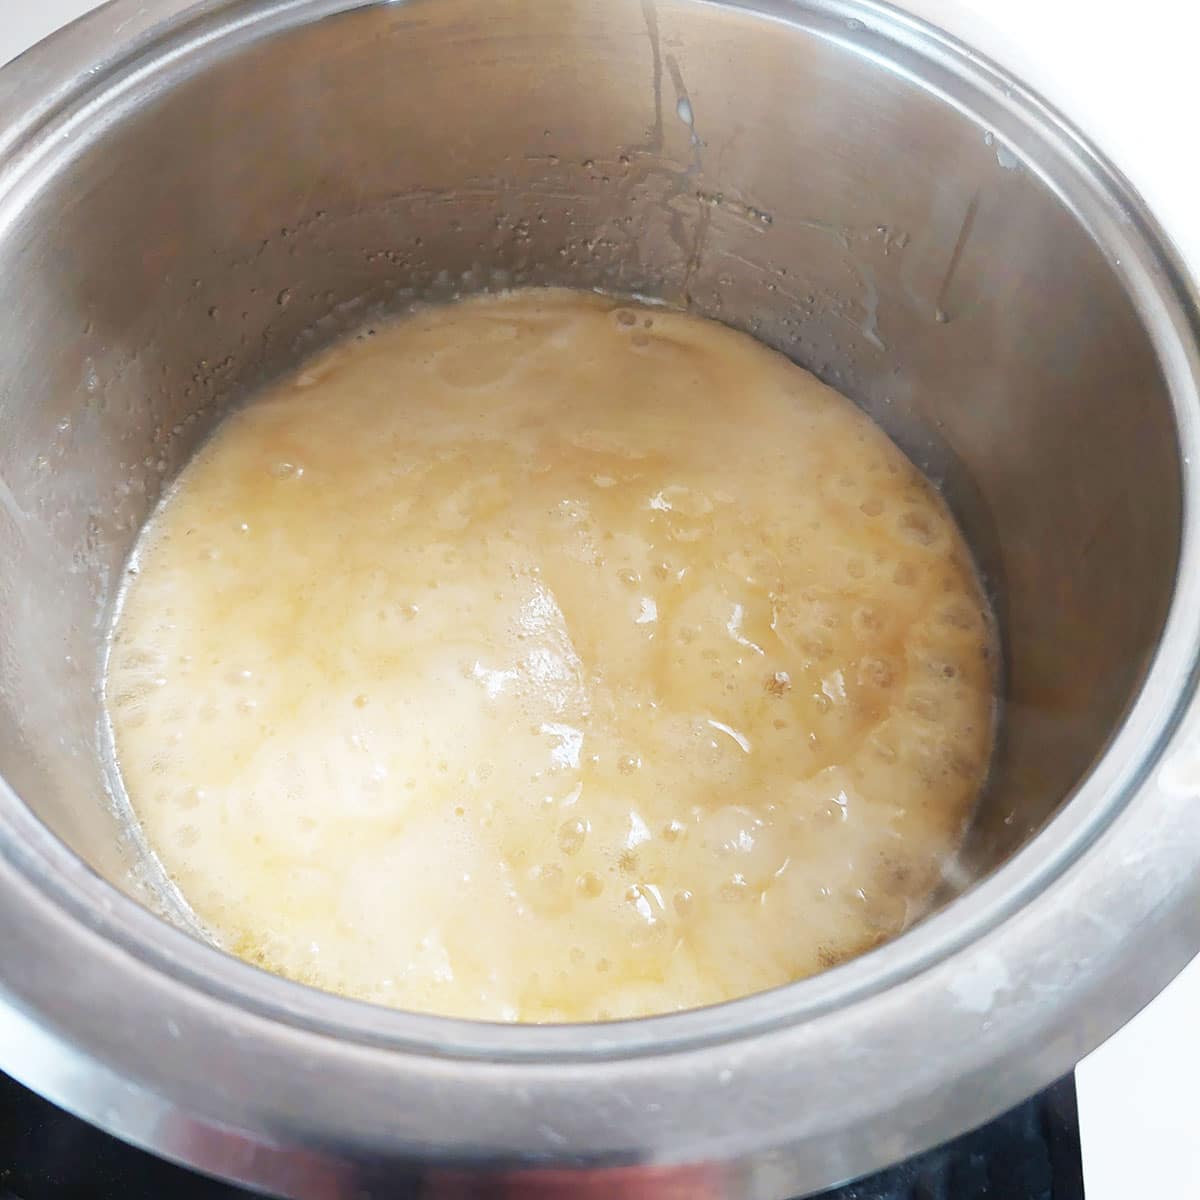 In a medium pot, combine the butter, brown sugar, heavy cream and salt. Boil over medium heat for 1 minute. Remove from heat and let sit for 5 minutes.